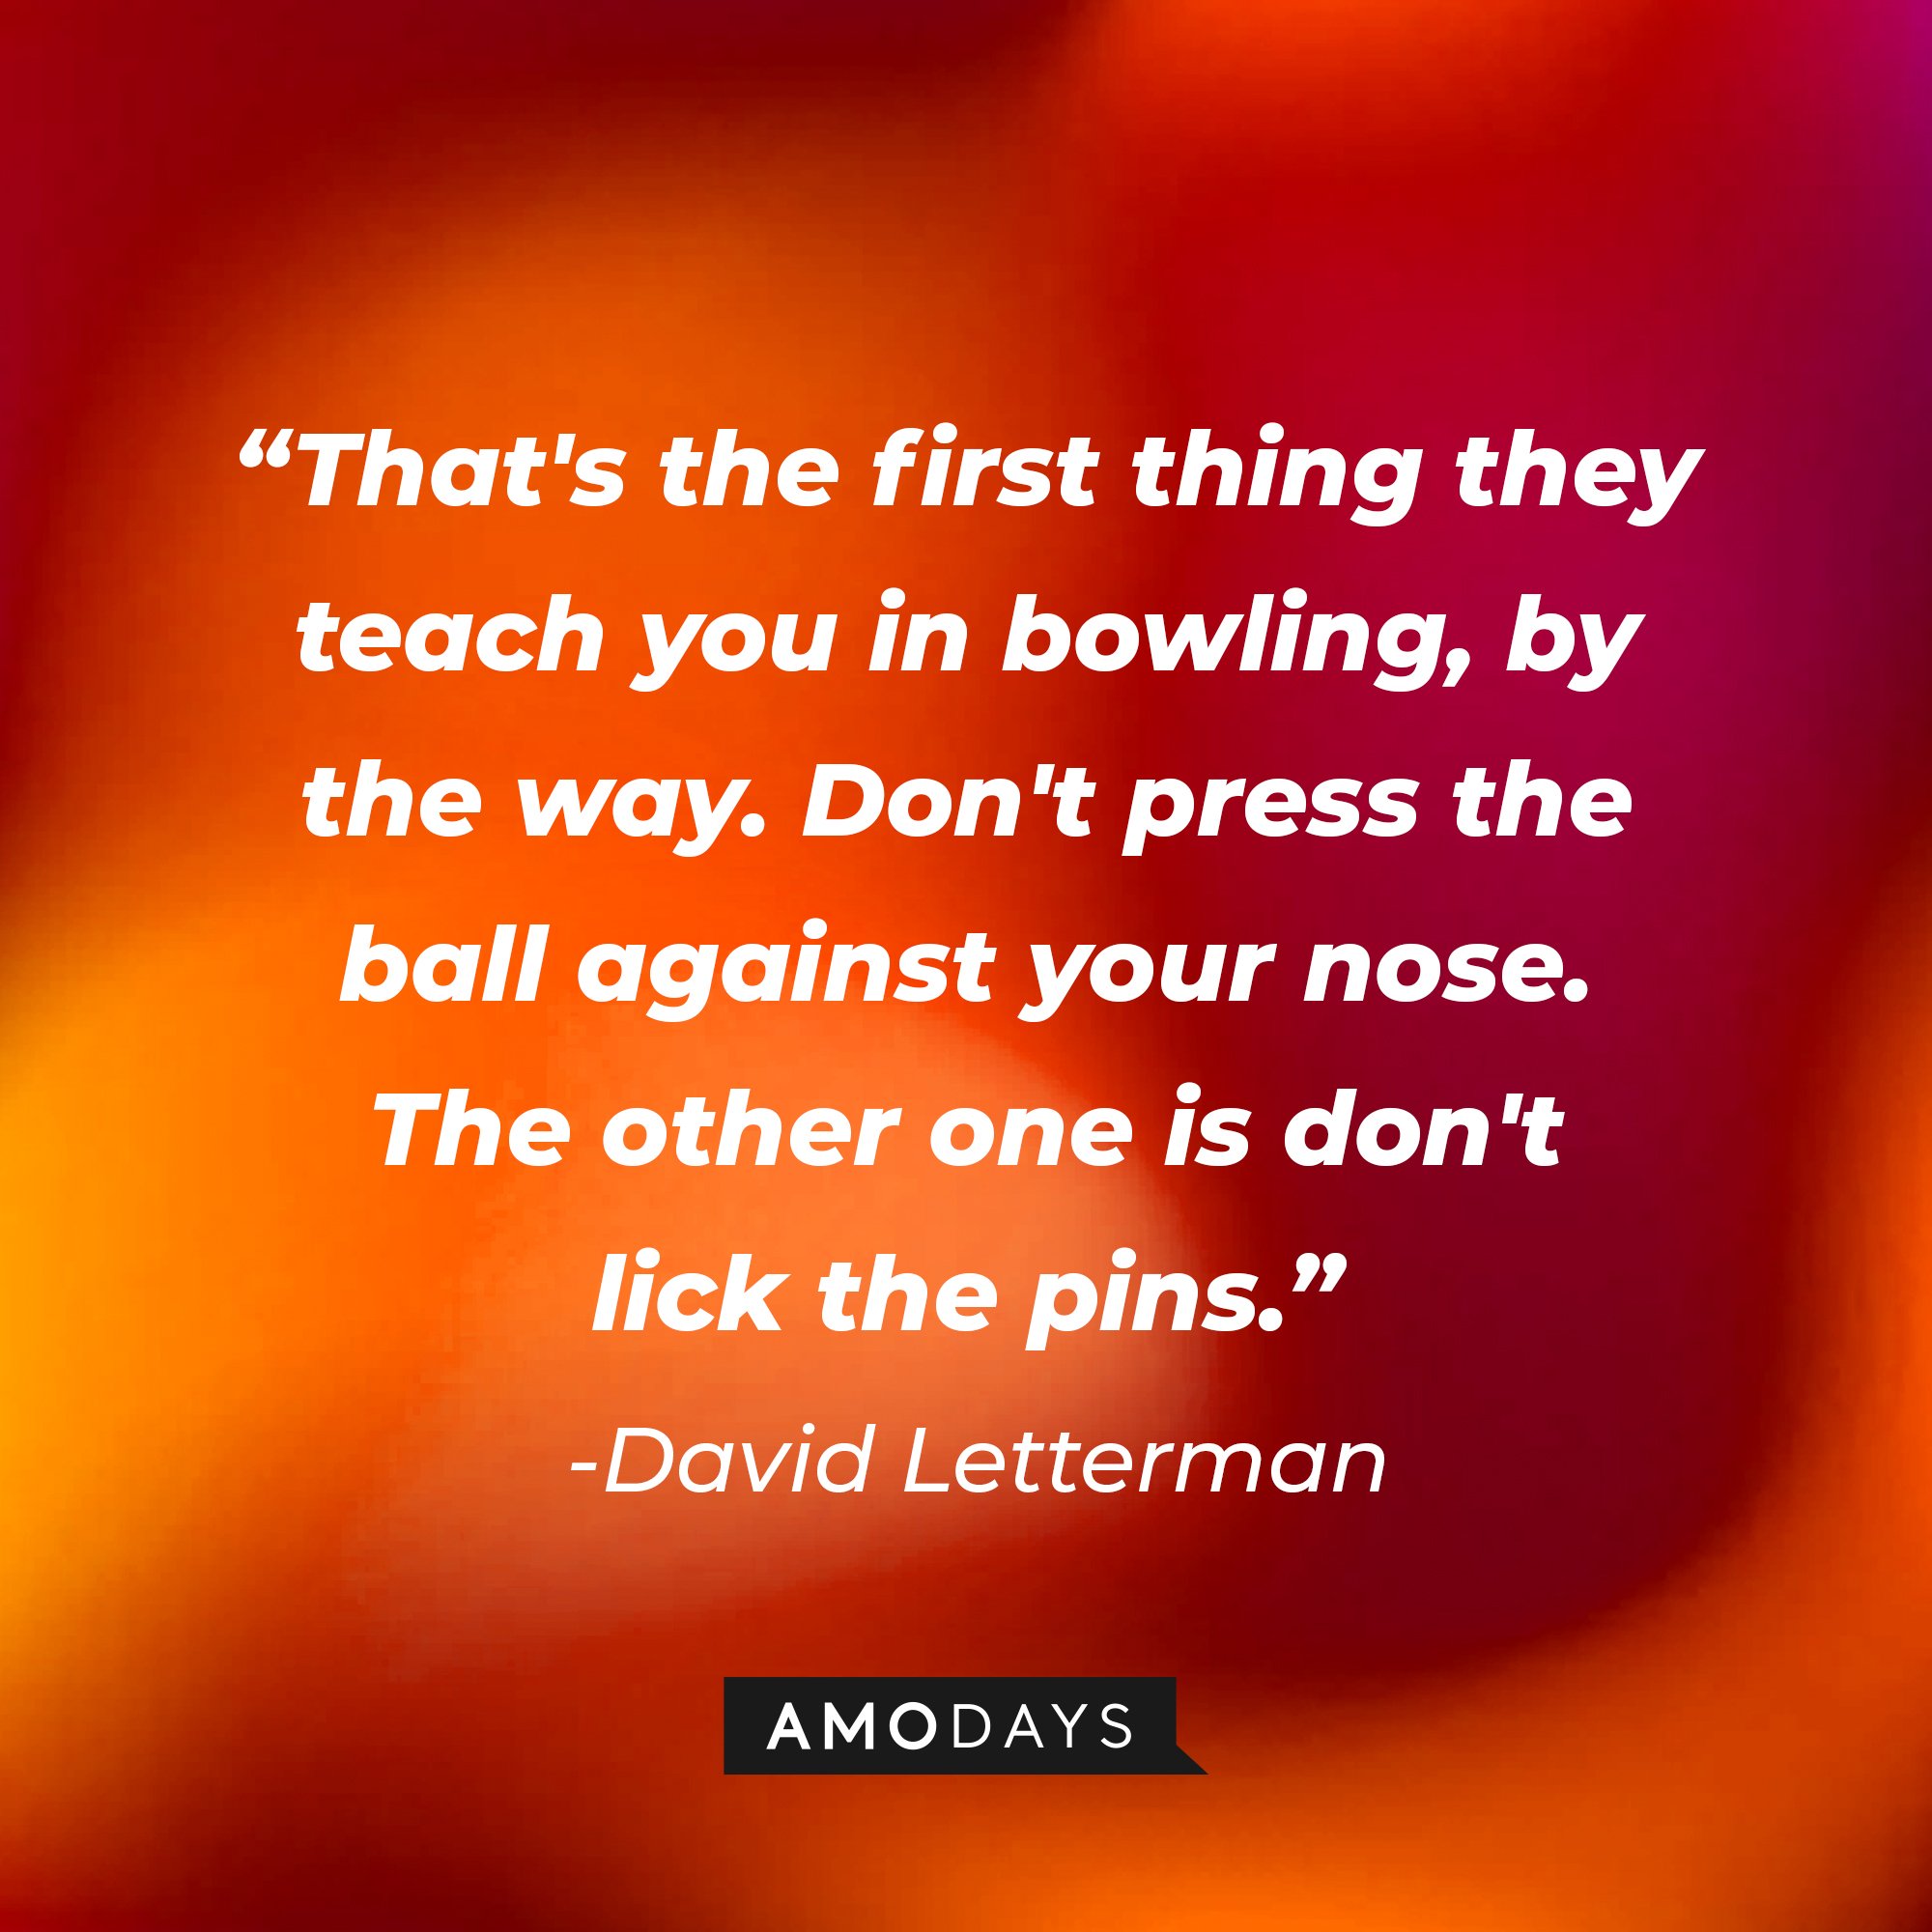 David Letterman's quote: "That's the first thing they teach you in bowling, by the way. Don't press the ball against your nose. The other one is don't lick the pins." | Image: AmoDays